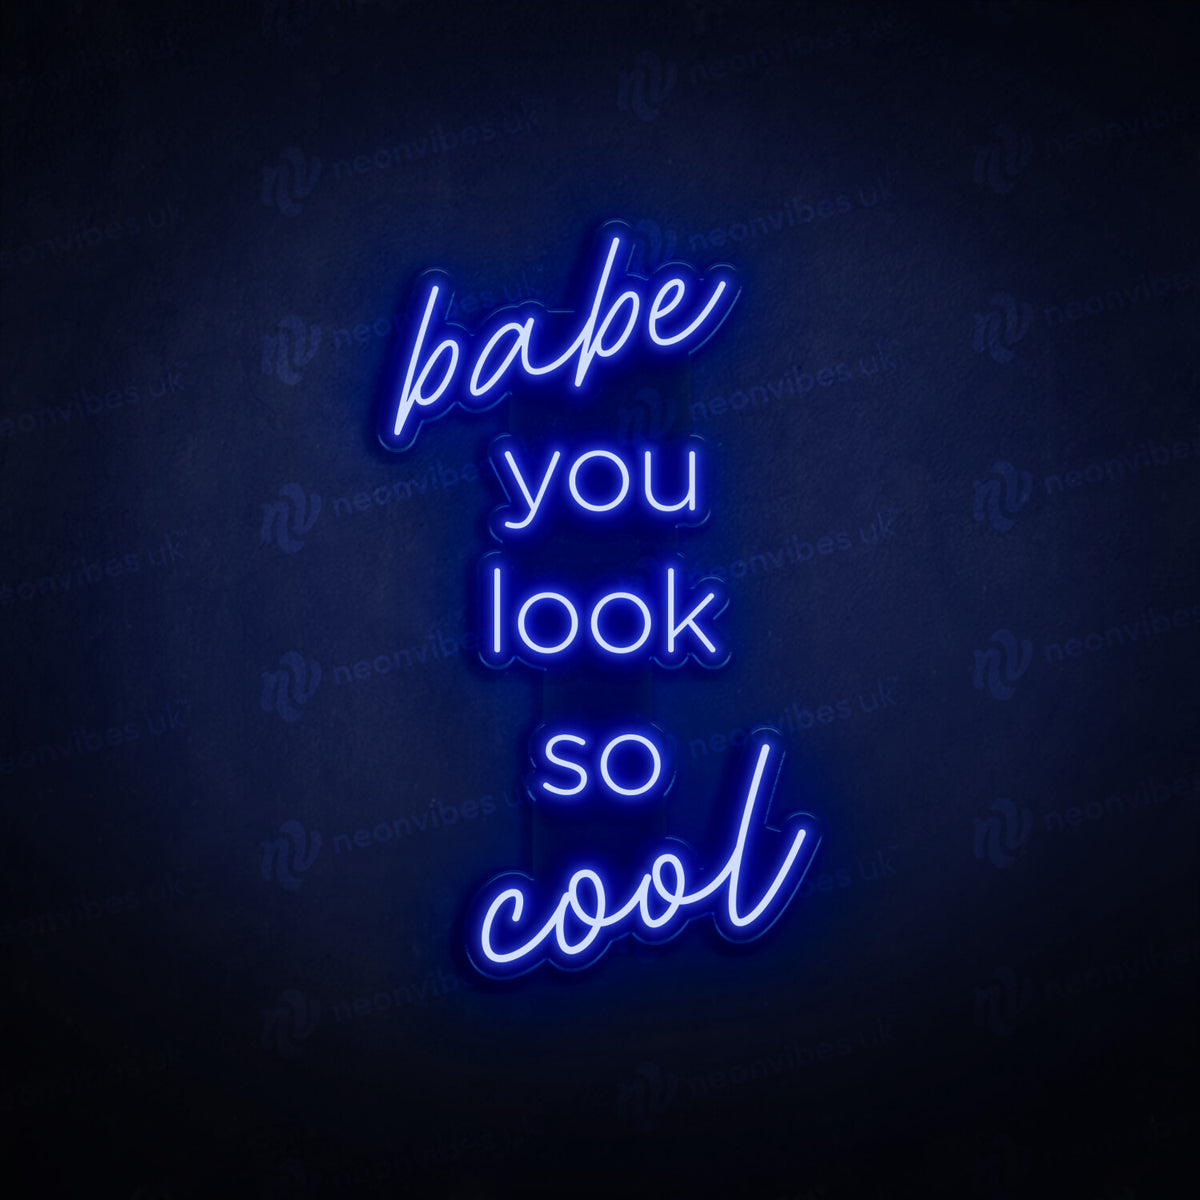 Babe you look so cool neon sign